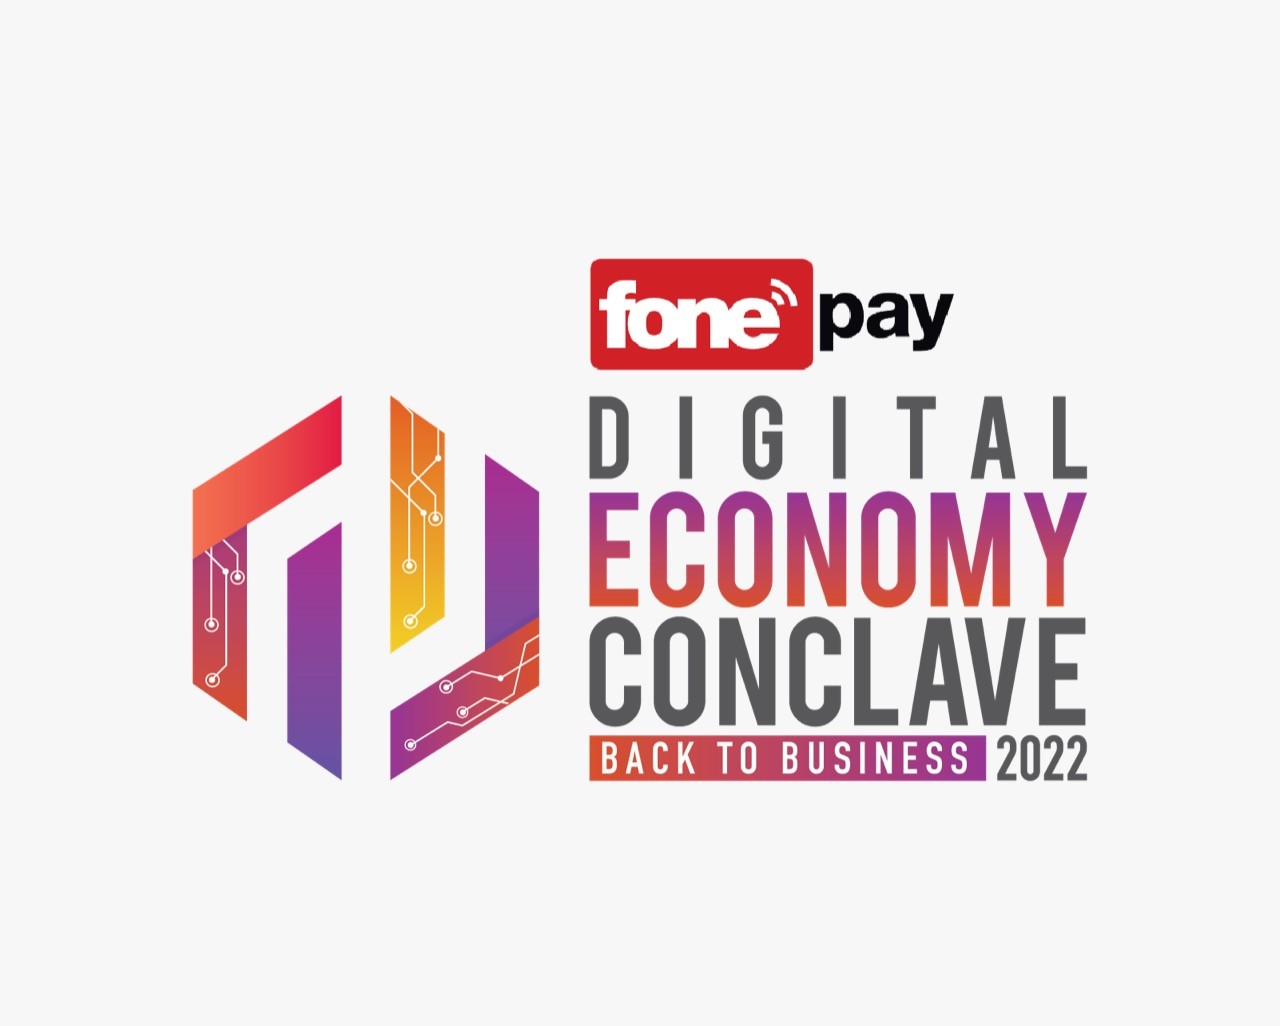 Fonepay Digital Conclave Second Edition to be Held on June 3 2022